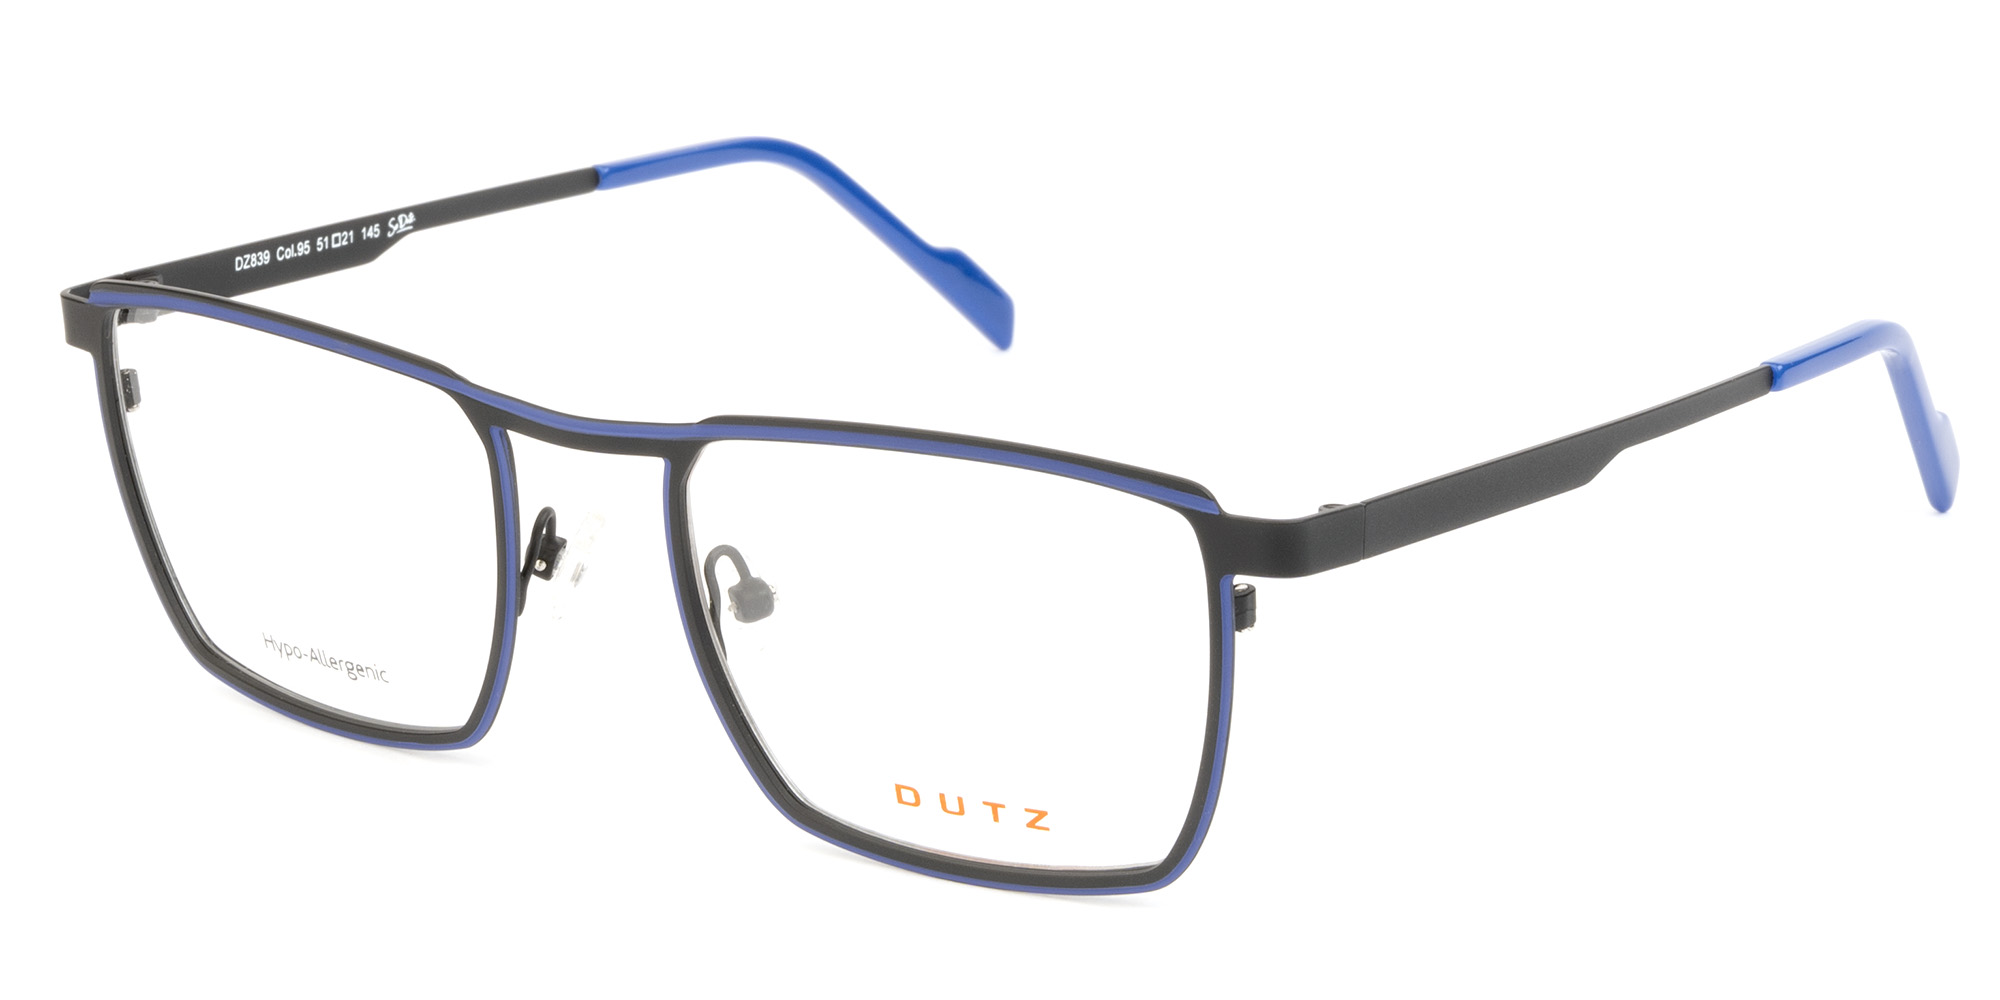 Men's, rectangular, bicolor, black combined with blue, metallic frame and temples, with assorted color acetate temple tips